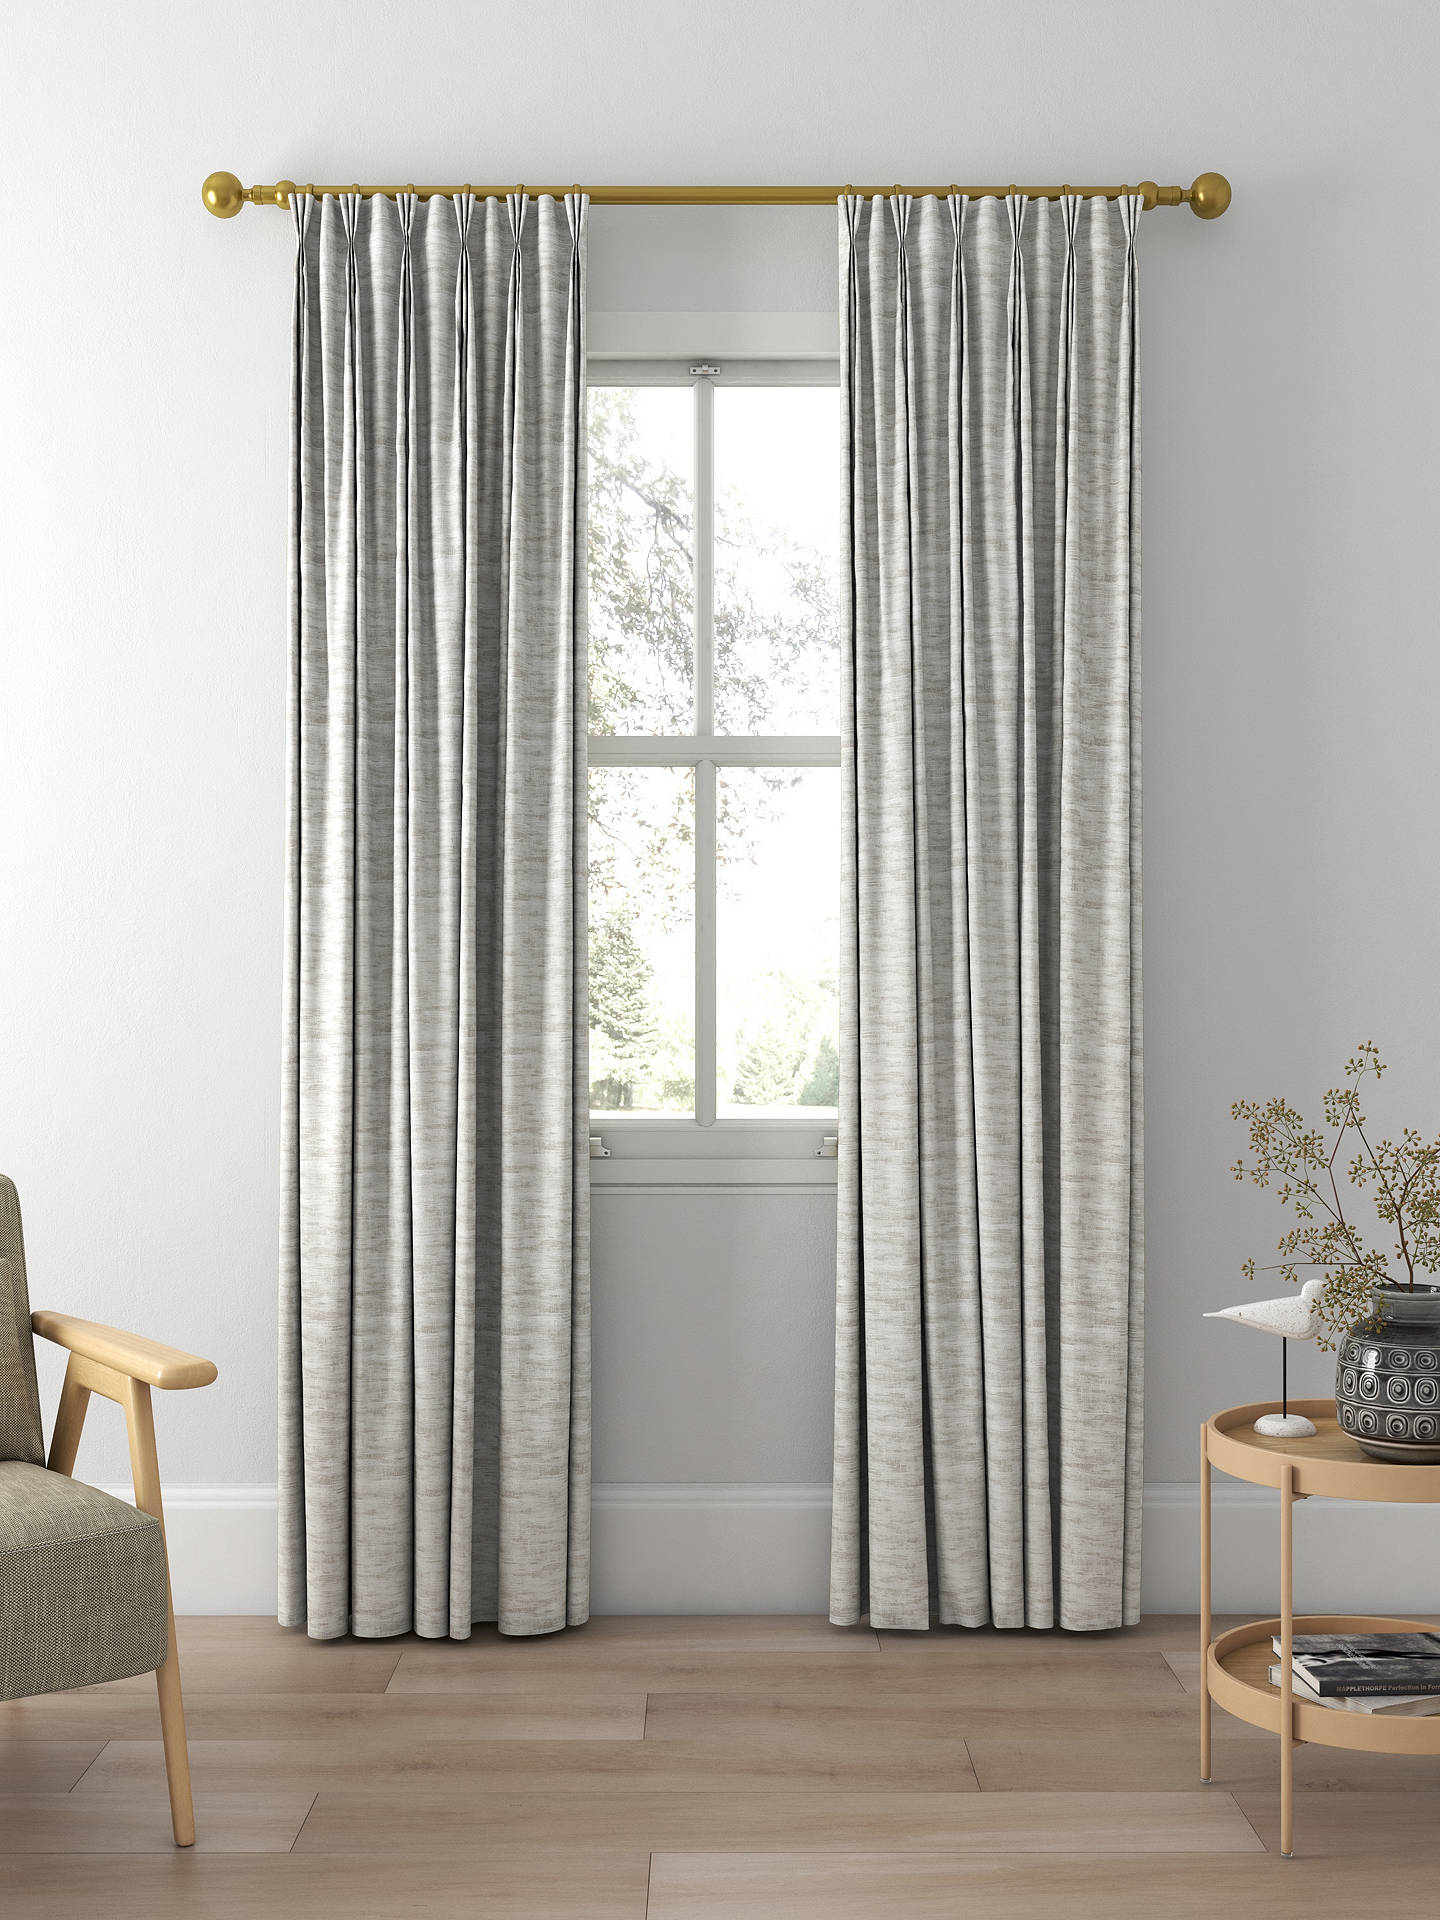 Laura Ashley Whinfell Made to Measure Curtains, Silver